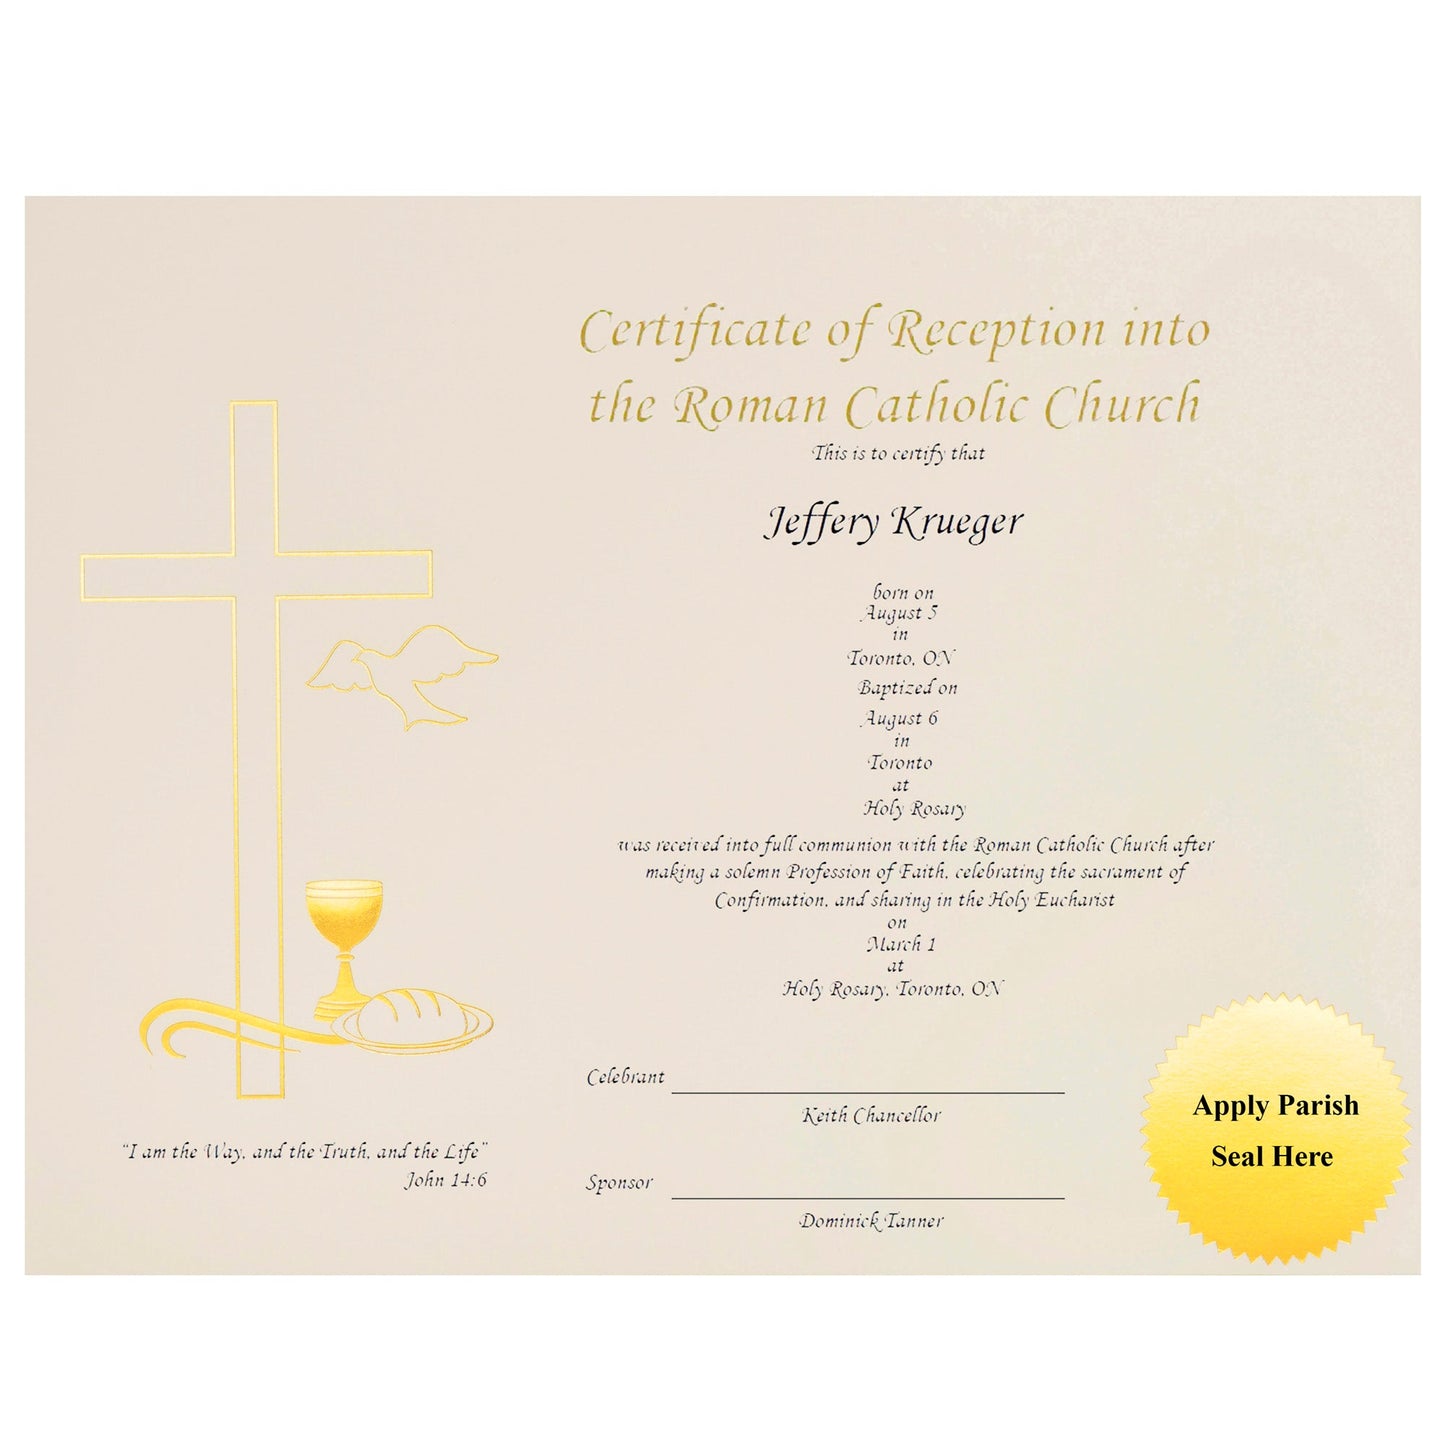 St. James® Religious Certificates - Reception into Church Certificates, 65 lb, Gold Foil, Ivory Card Stock, Pack of 50